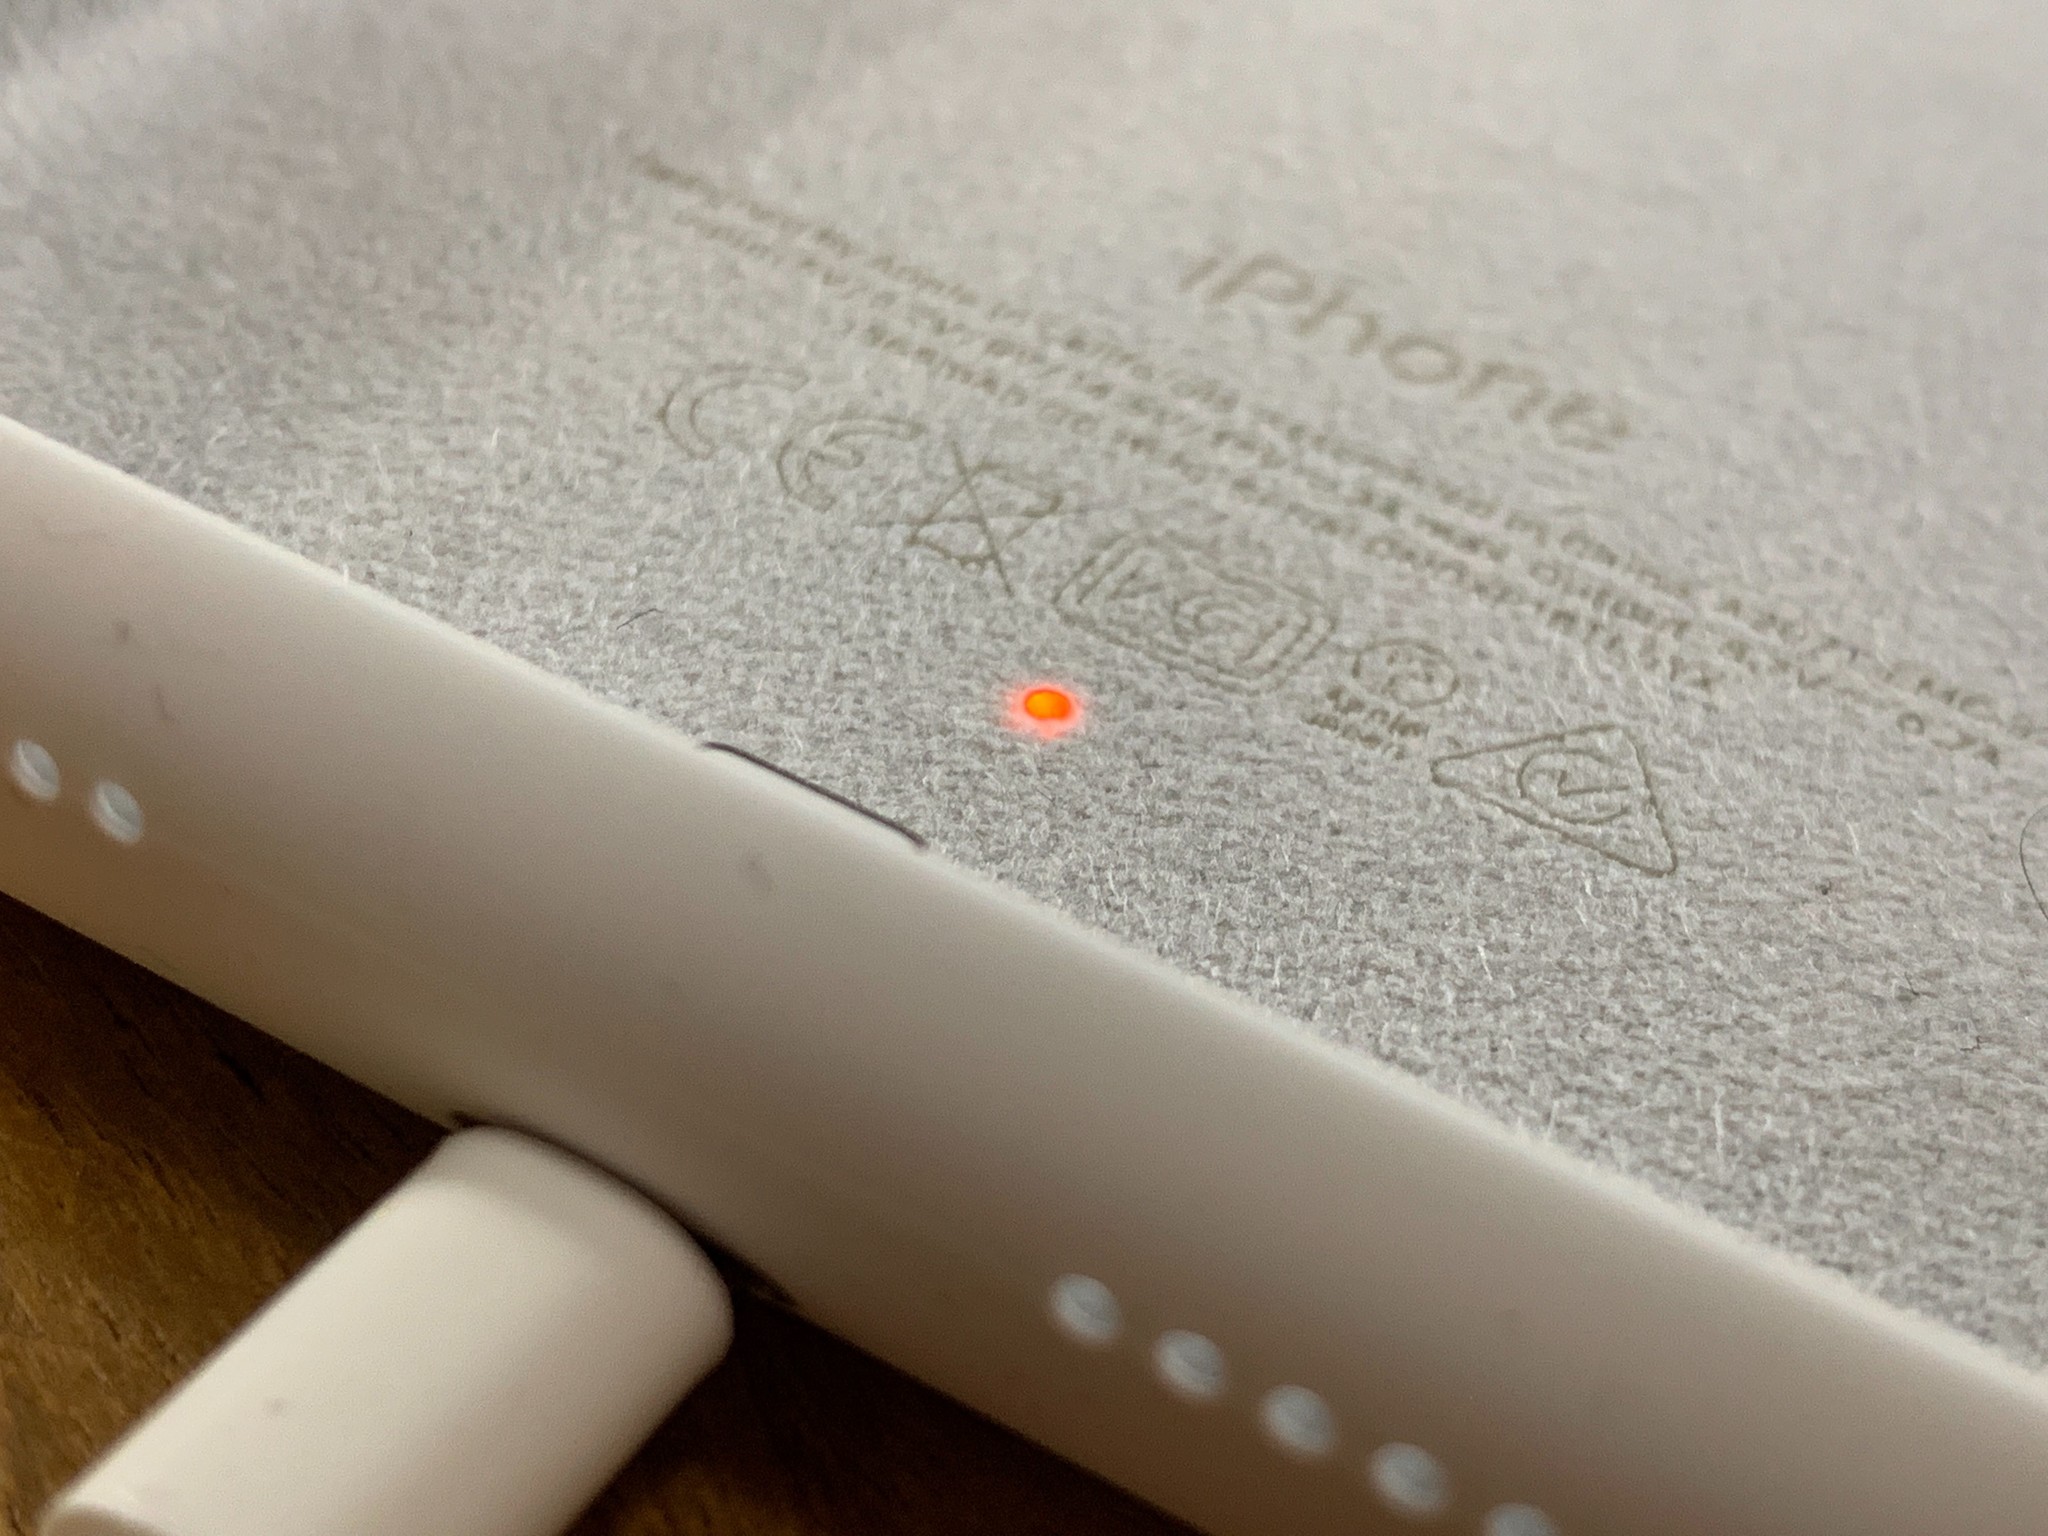 Close up of iPhone Smart Battery Case charging light